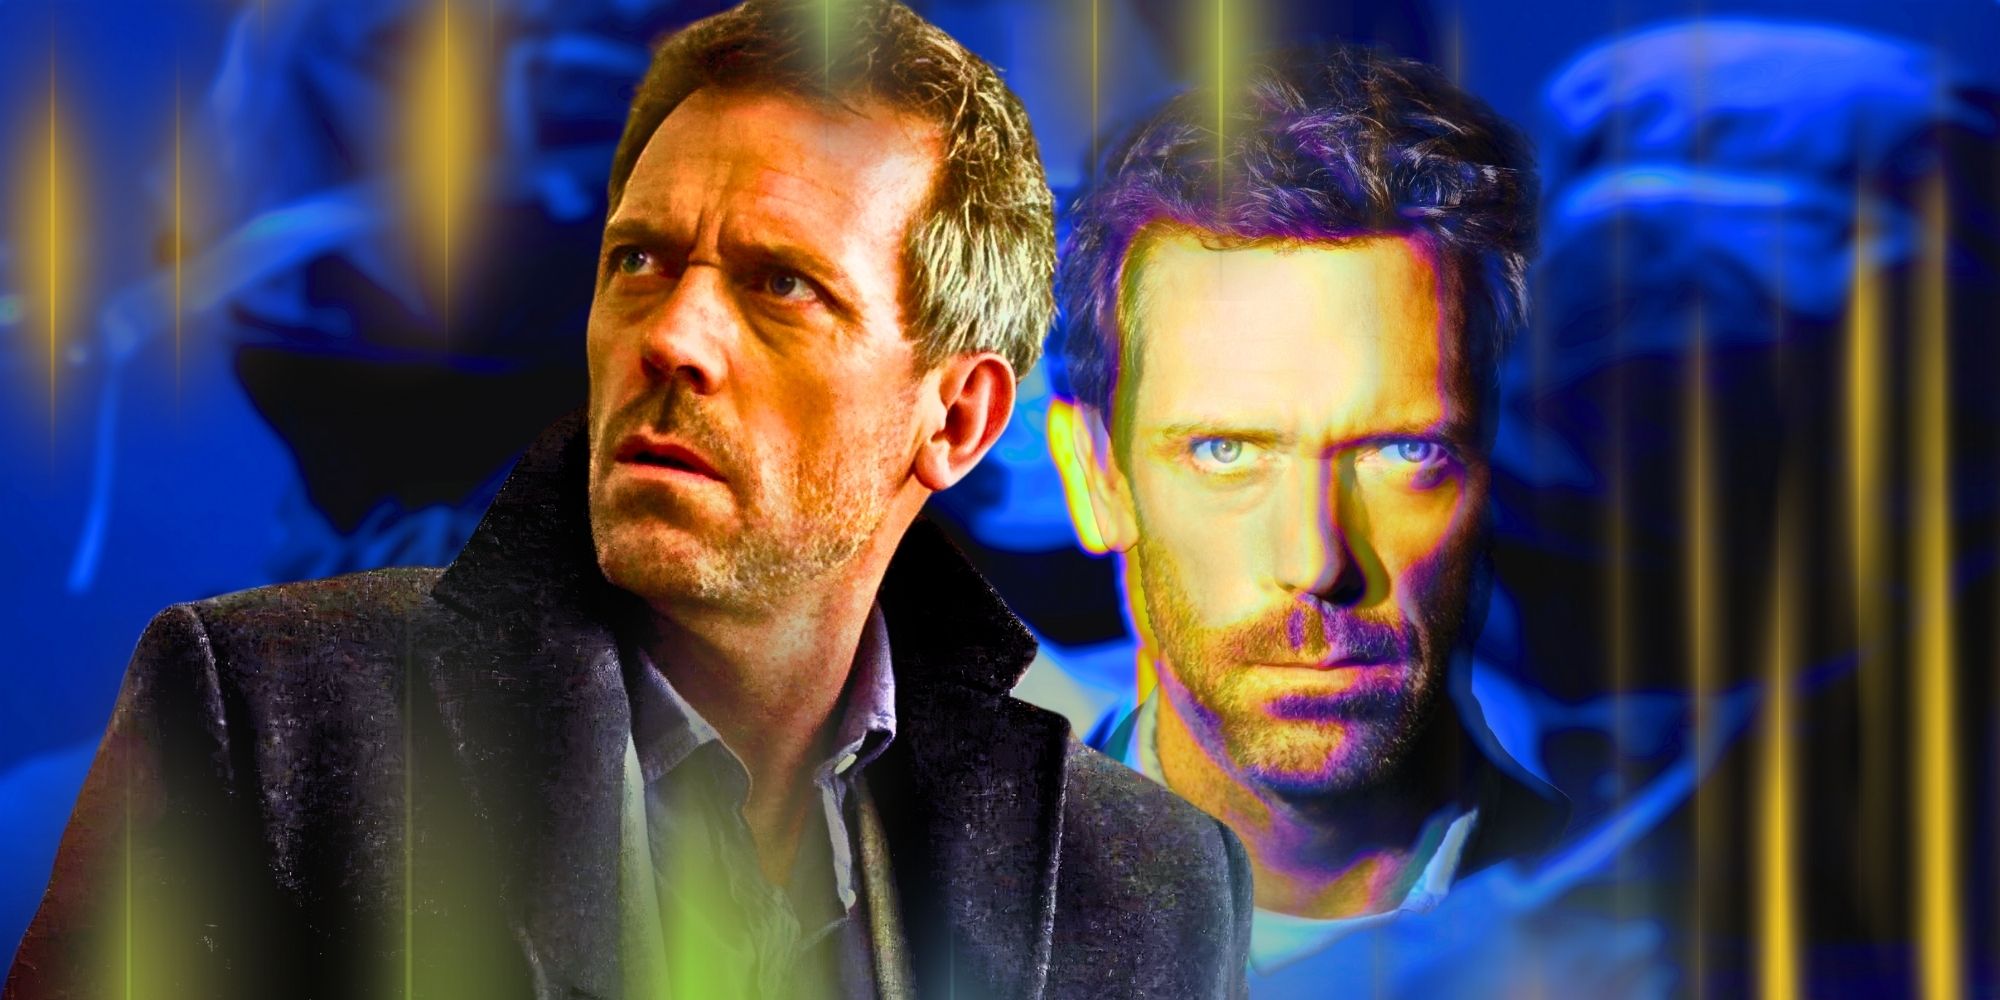 Gregory House played by Hugh Laurie in House M.D.